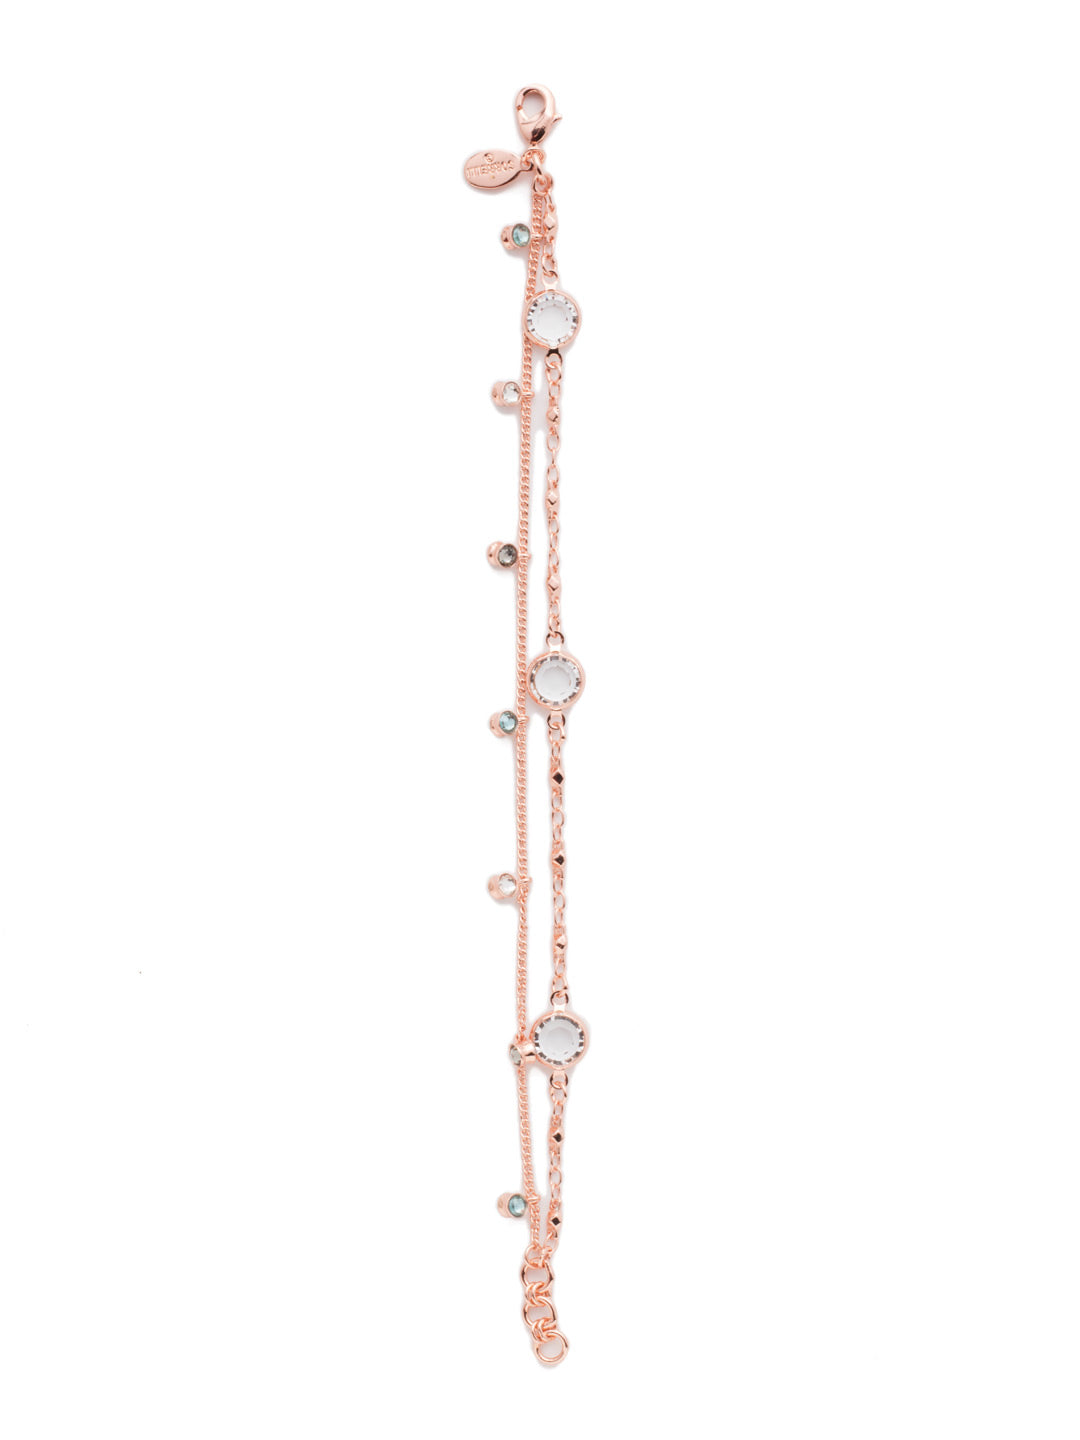 Dewdrop Layered Bracelet - BEK36RGCAZ - <p>Add a dainty dash of crystal stones to your outfit for that something a bit extra special with this classic crystal layered bracelet. From Sorrelli's Crystal Azure collection in our Rose Gold-tone finish.</p>